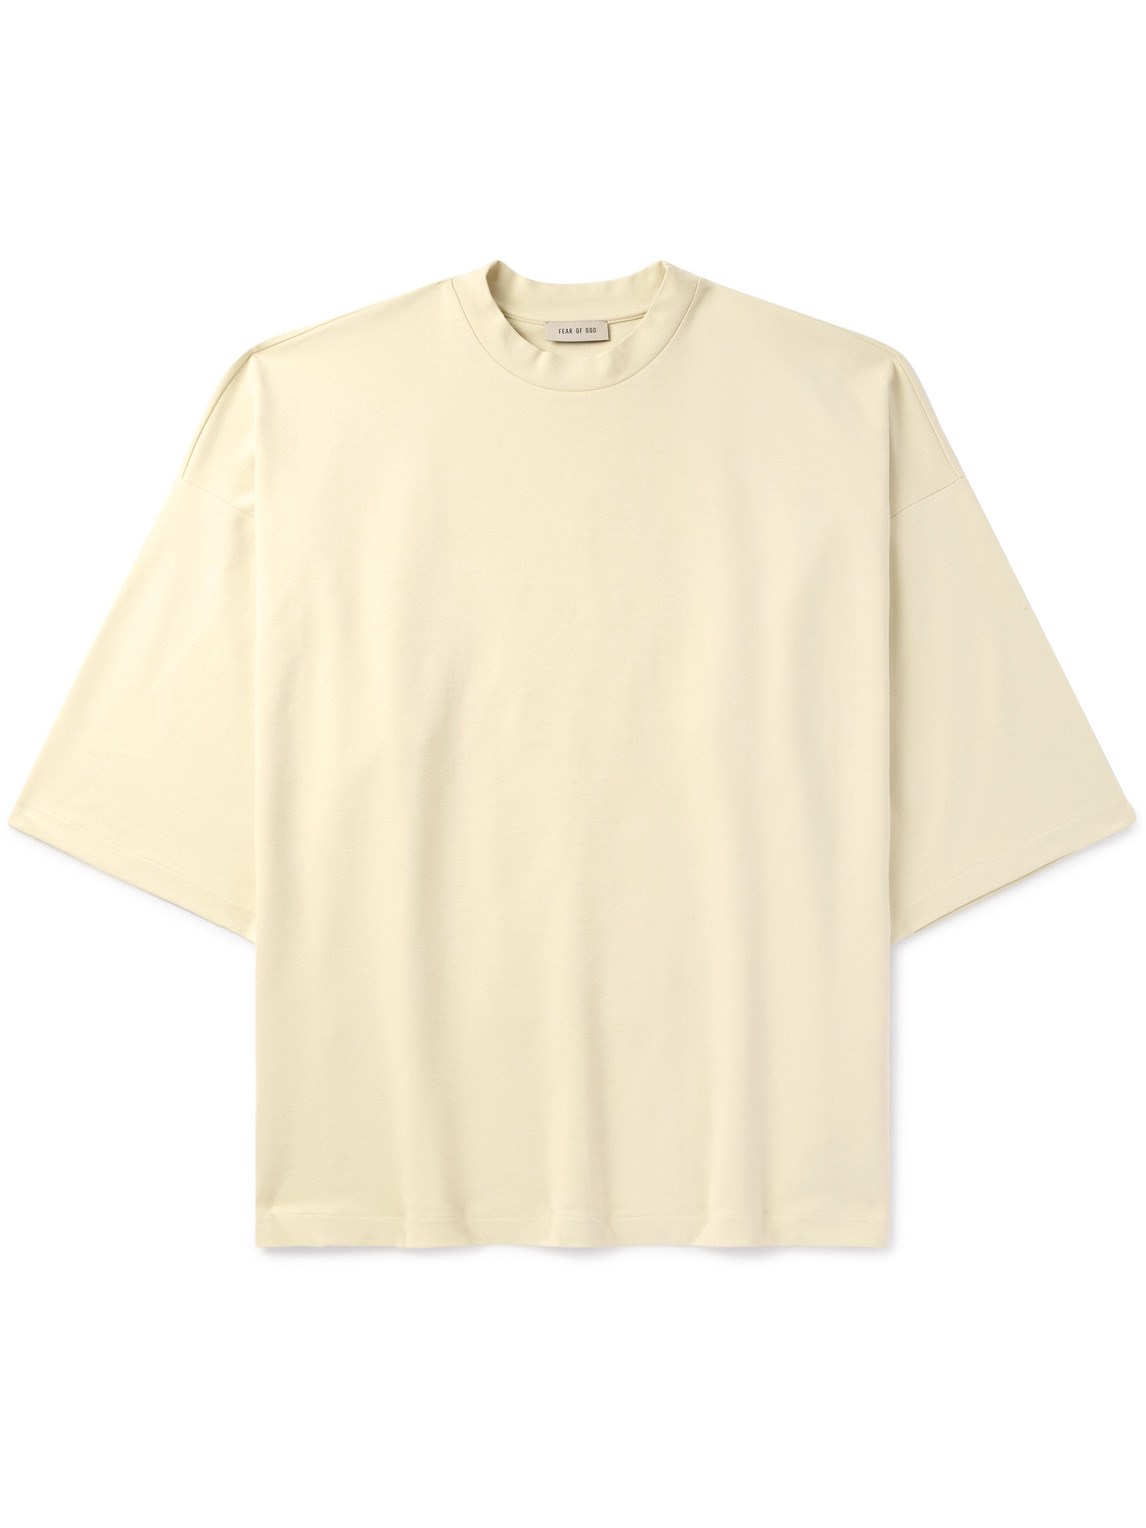 Fear of God - Thunderbird Milano Oversized Embroidered Jersey T-Shirt - Men - Yellow - XL von Fear of God